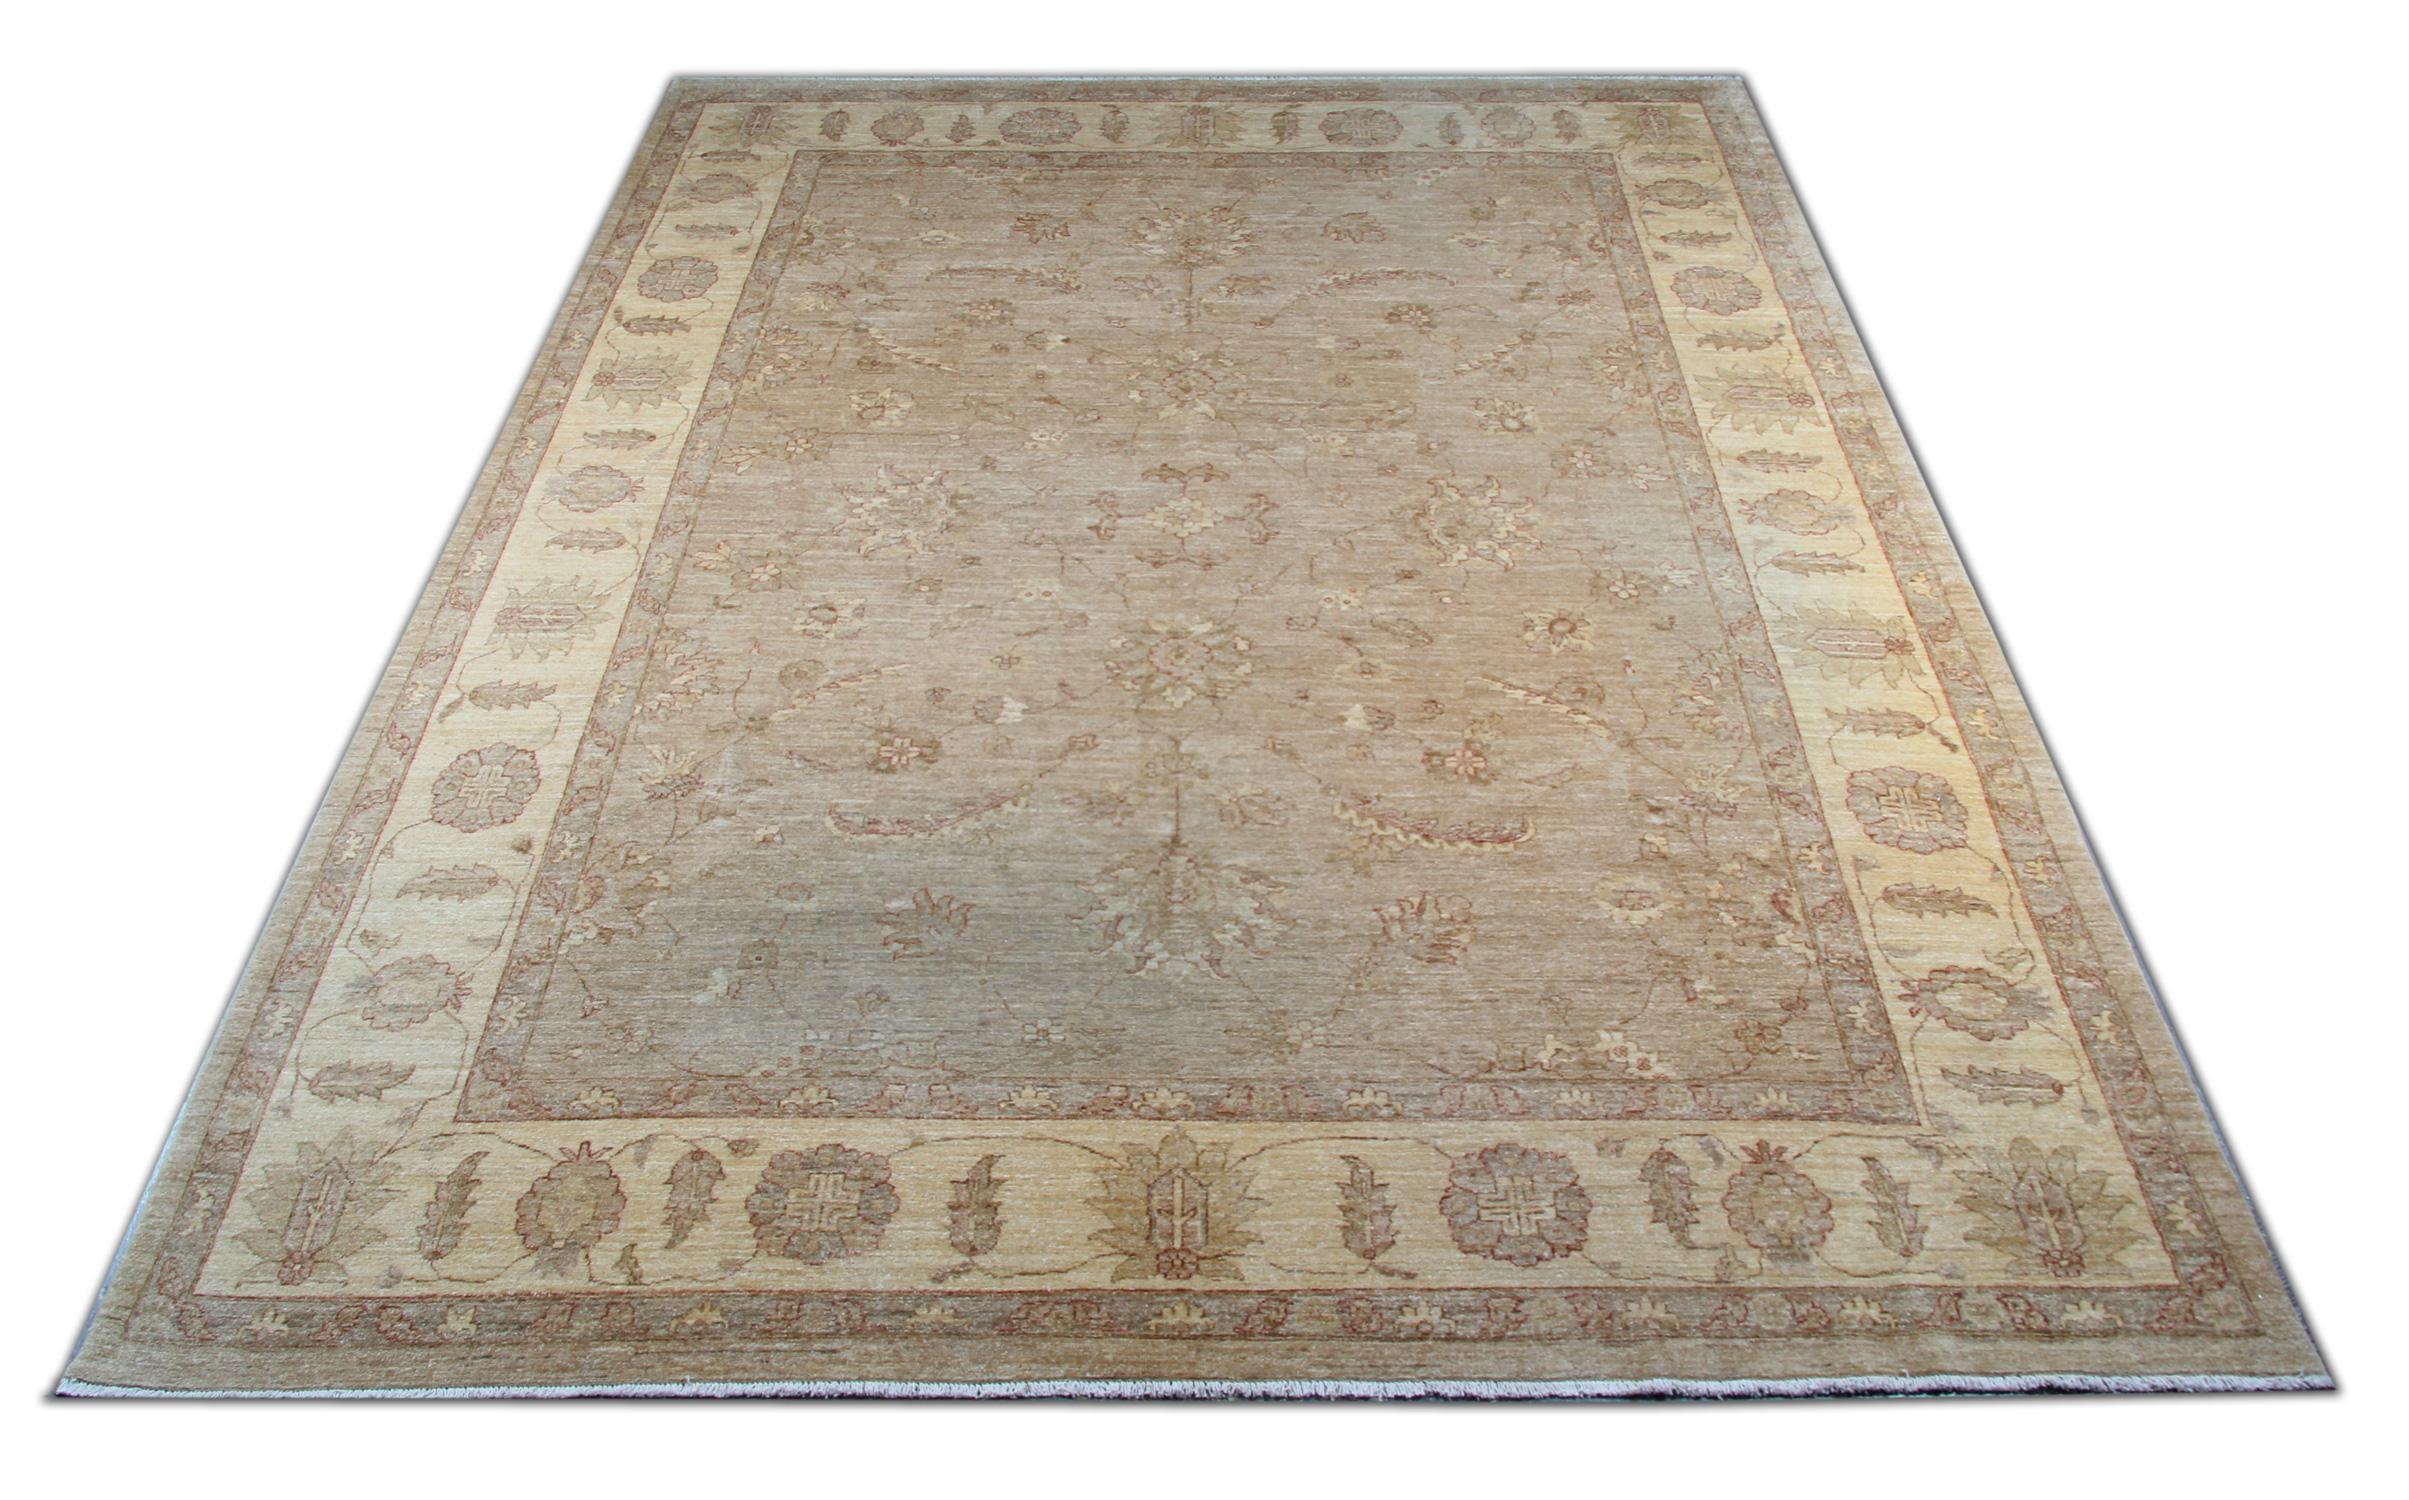 This impressive 21st century Ivory Afghan rug displays an all-over geometric pattern with intermingled medallions and a highly detailed border. This beautiful delicate design is sure to uplift any modern or traditional home. This modern Sultanabad